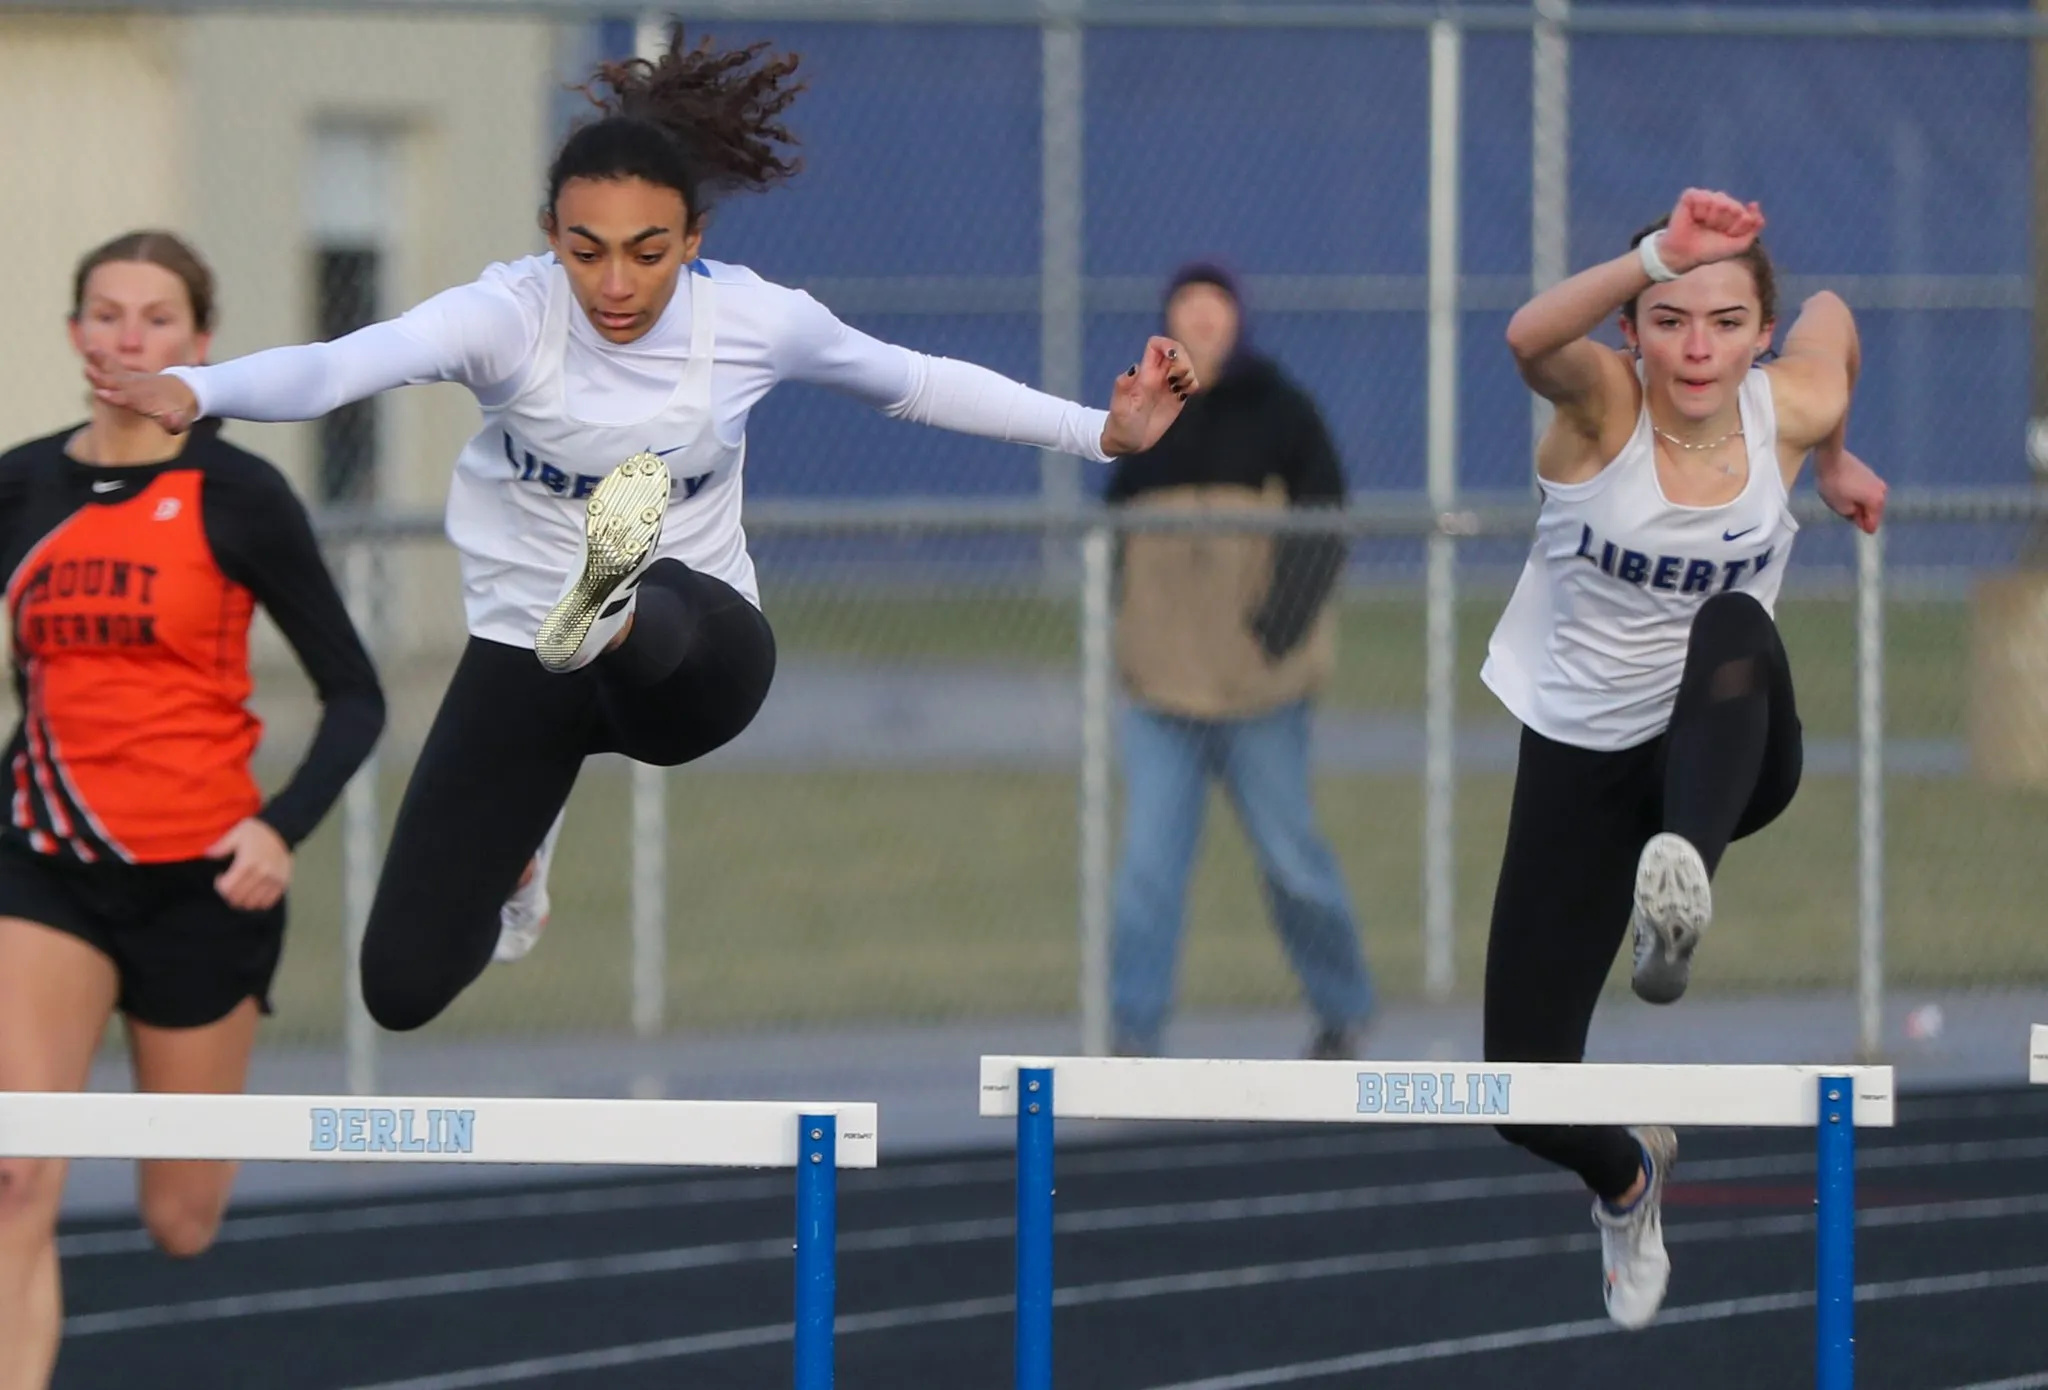 Hurdling: Track and field hurdles, Sprint race with hurdles, Short distance running, Olentangy Liberty High School. 2050x1390 HD Background.